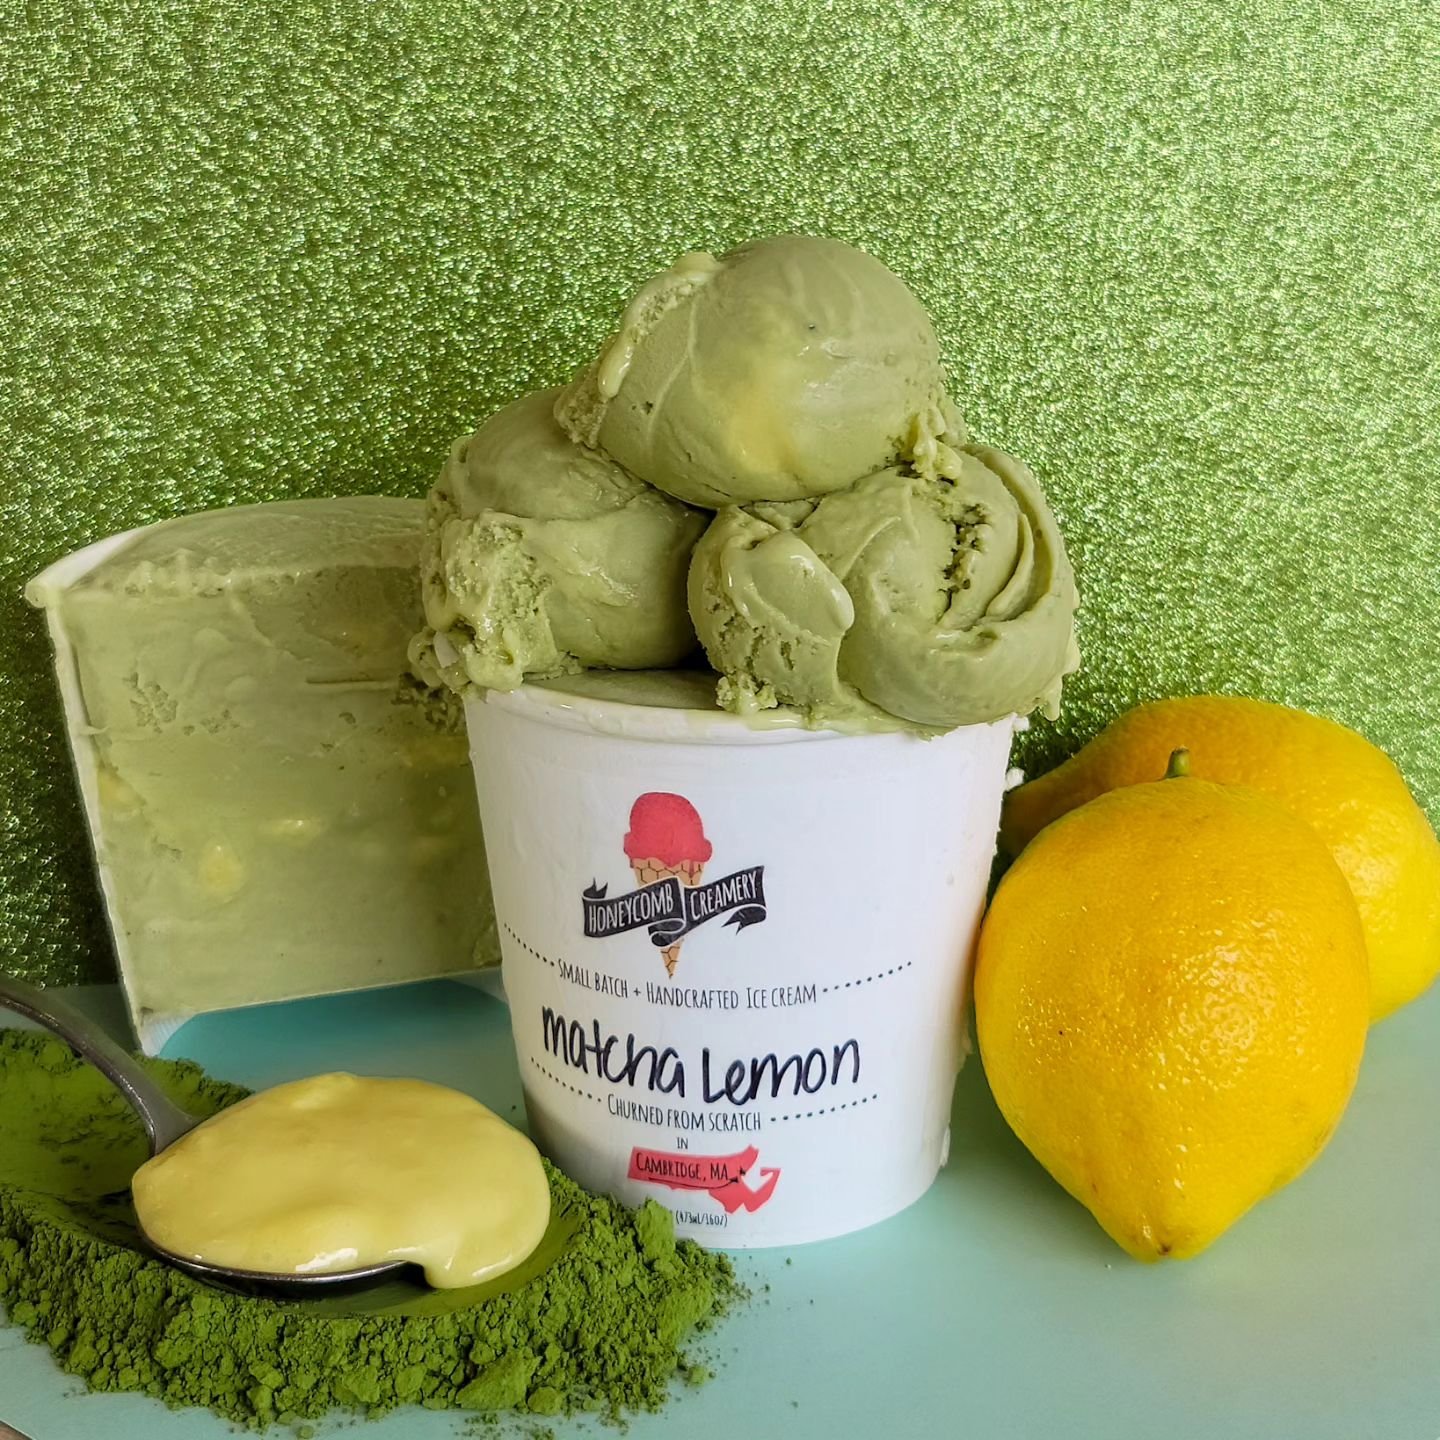 Who's ready for some April flavors?🙋&zwj;♀️

MATCHA LEMON is a matcha ice cream (made with matcha from @mem_tea !) swirled with ribbons of homemade lemon curd. Vibrant, colorful, a mix of earthy, grassy, and sweetly zesty, this is a creamy scoop per